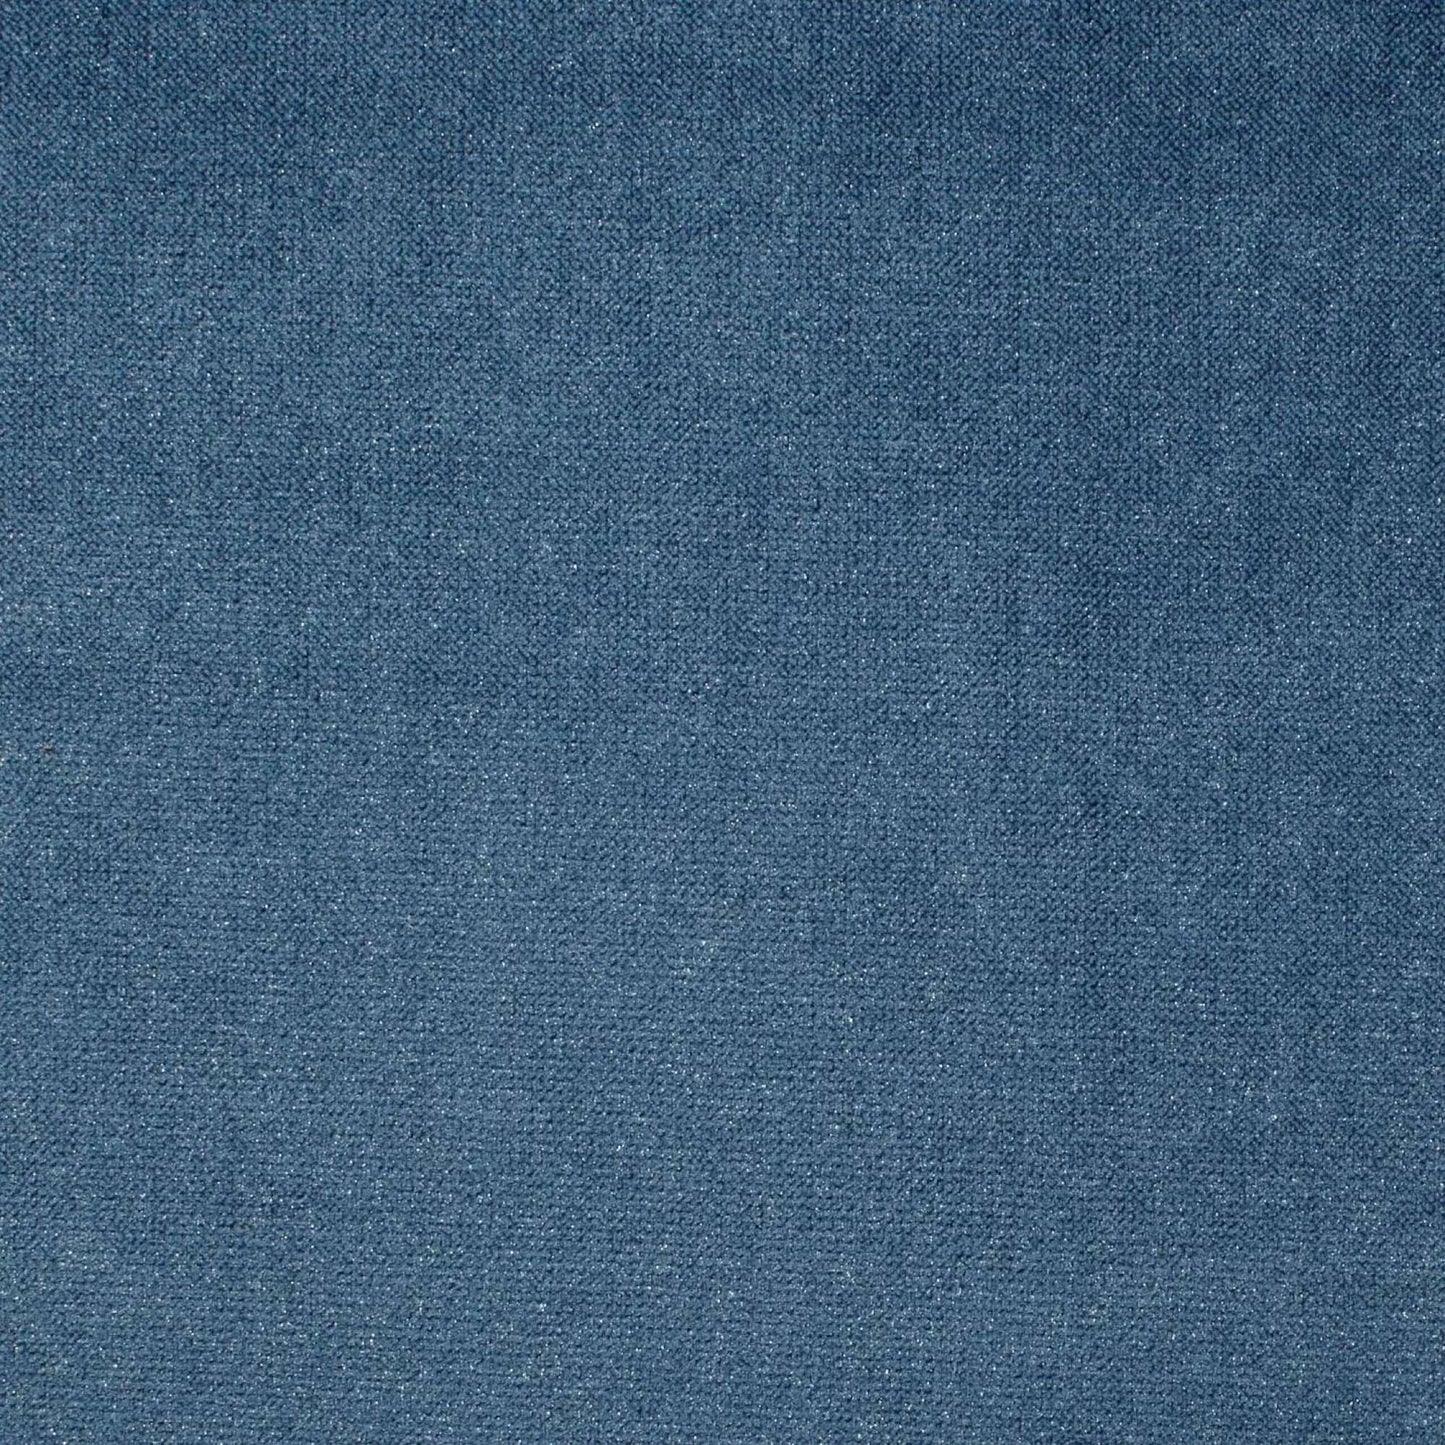 MYSTERE OCEAN FABRIC SAMPLE | MID RANGE COLLECTION